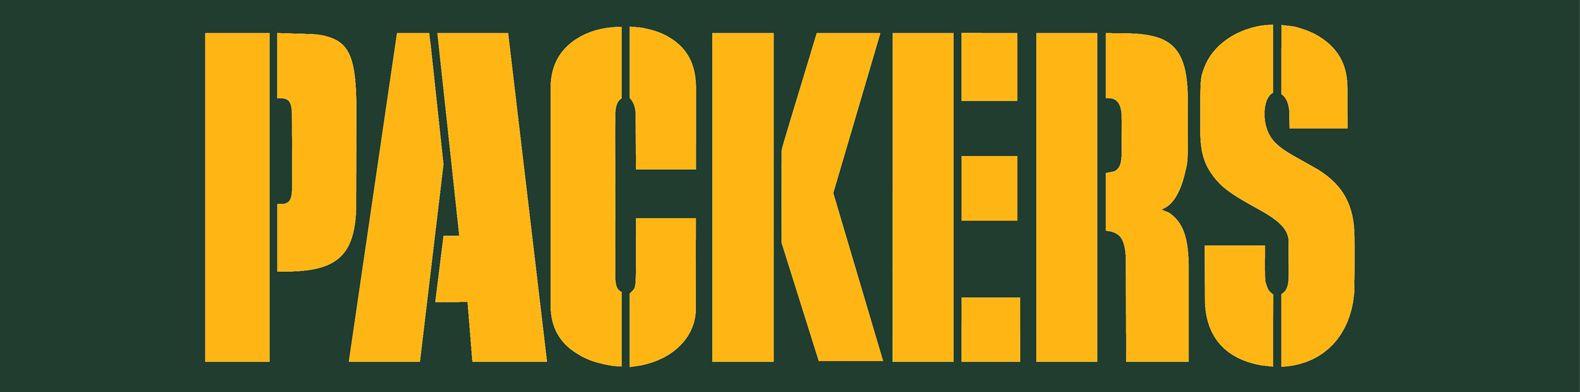 Packers Logo - Green Bay Packers Logo, Green Bay Packers Symbol Meaning, History ...